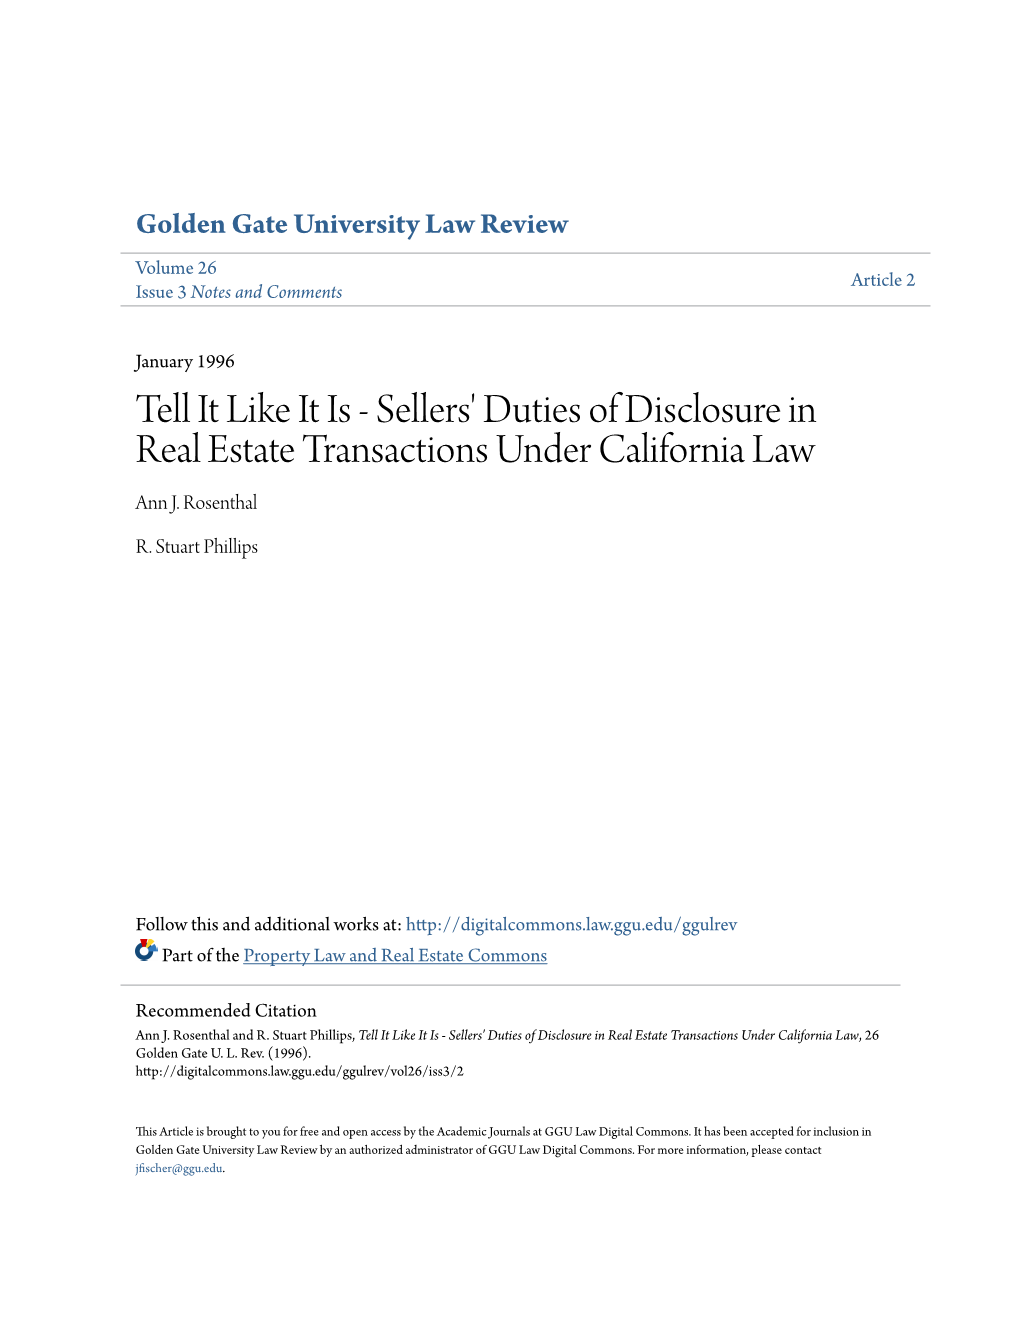 Sellers' Duties of Disclosure in Real Estate Transactions Under California Law Ann J